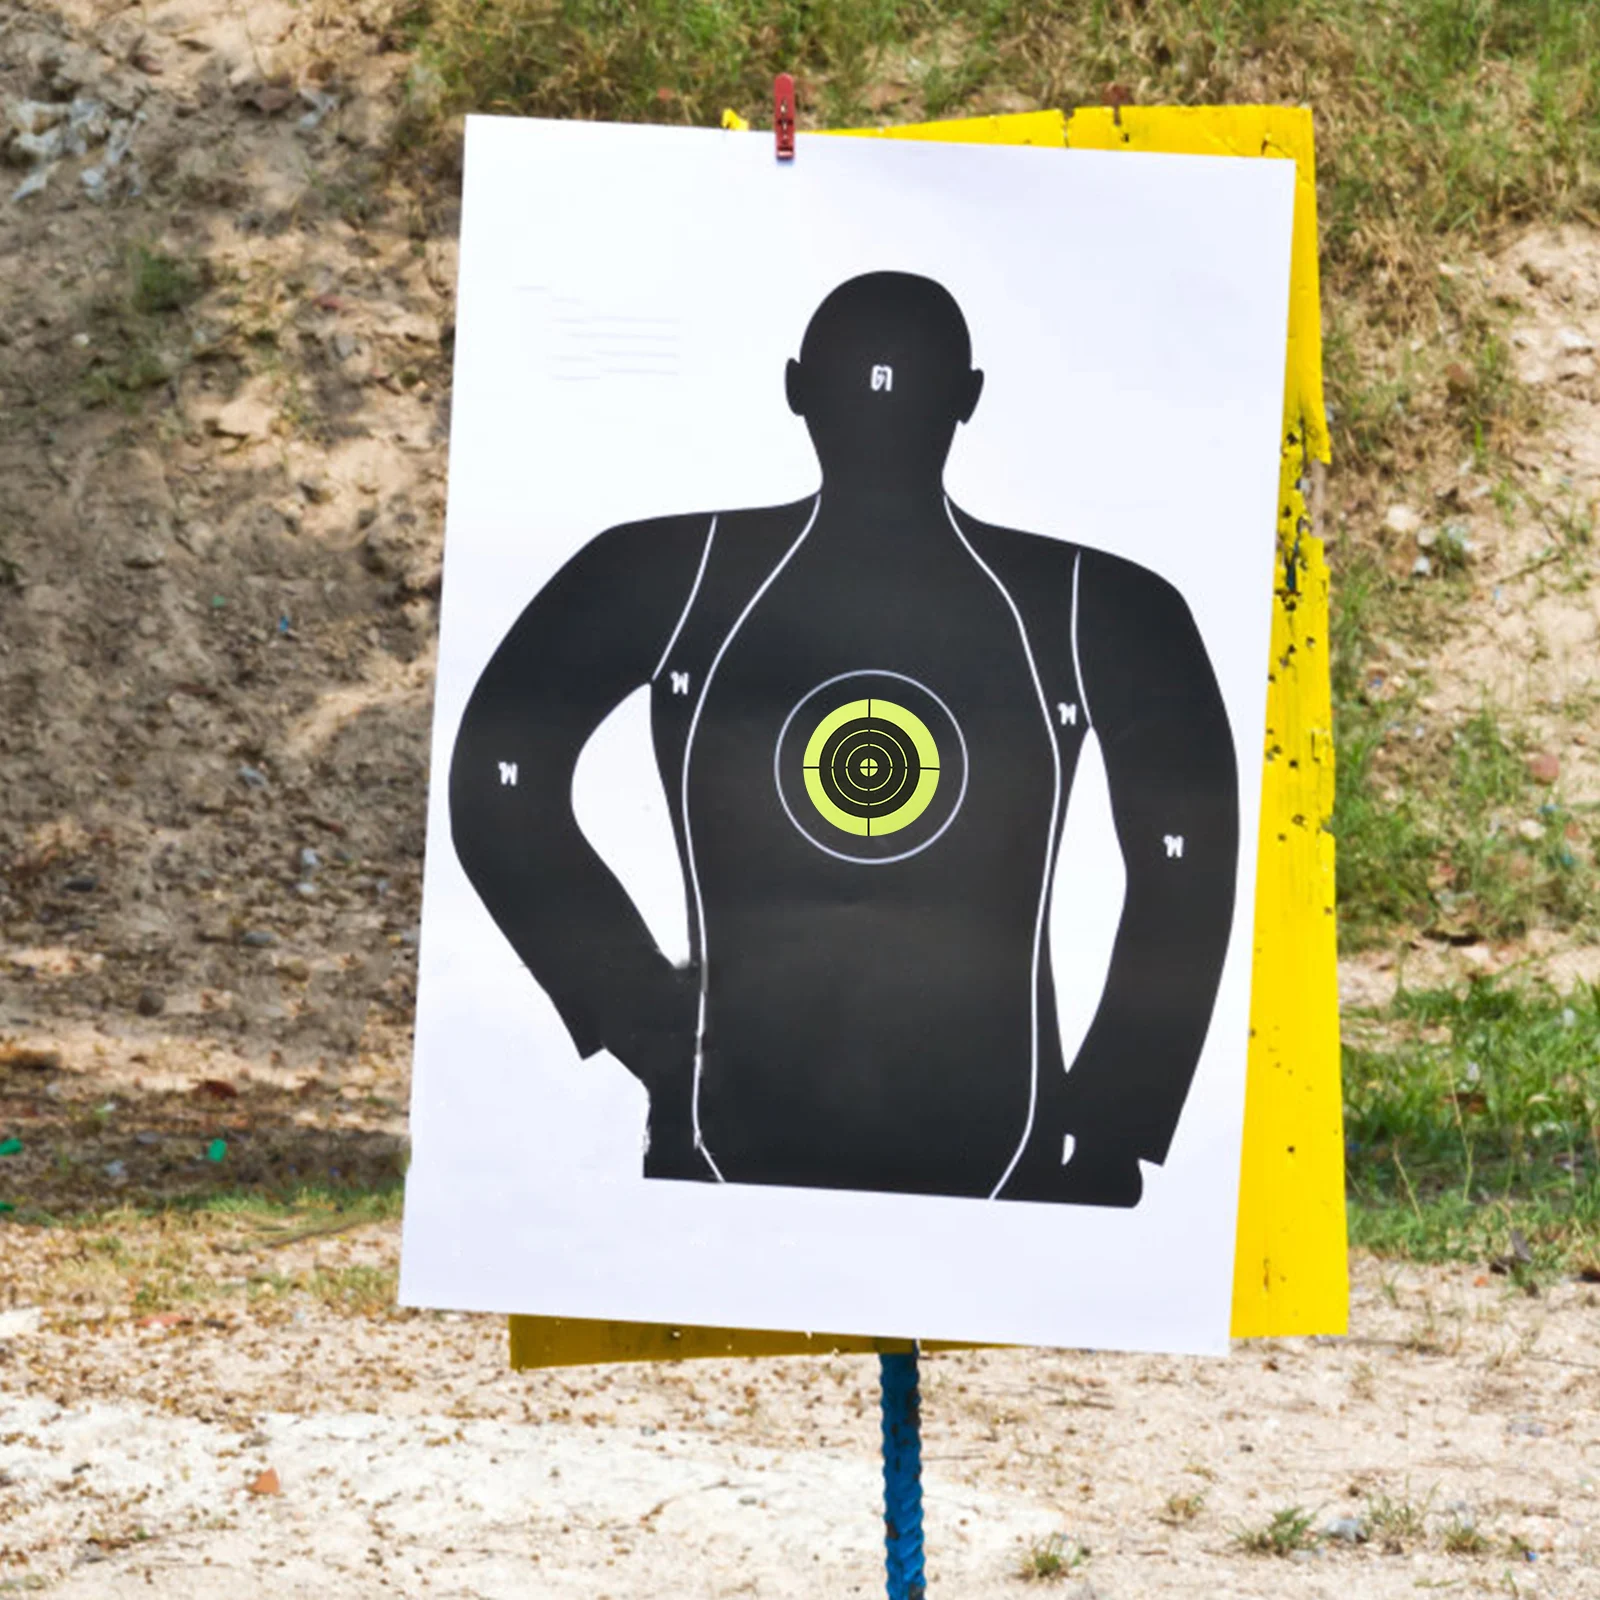 

198/208 Paper Targets for Shooting Range Hunting Accessories Round Labels Spot Self-adhesive Stickers Red Circle